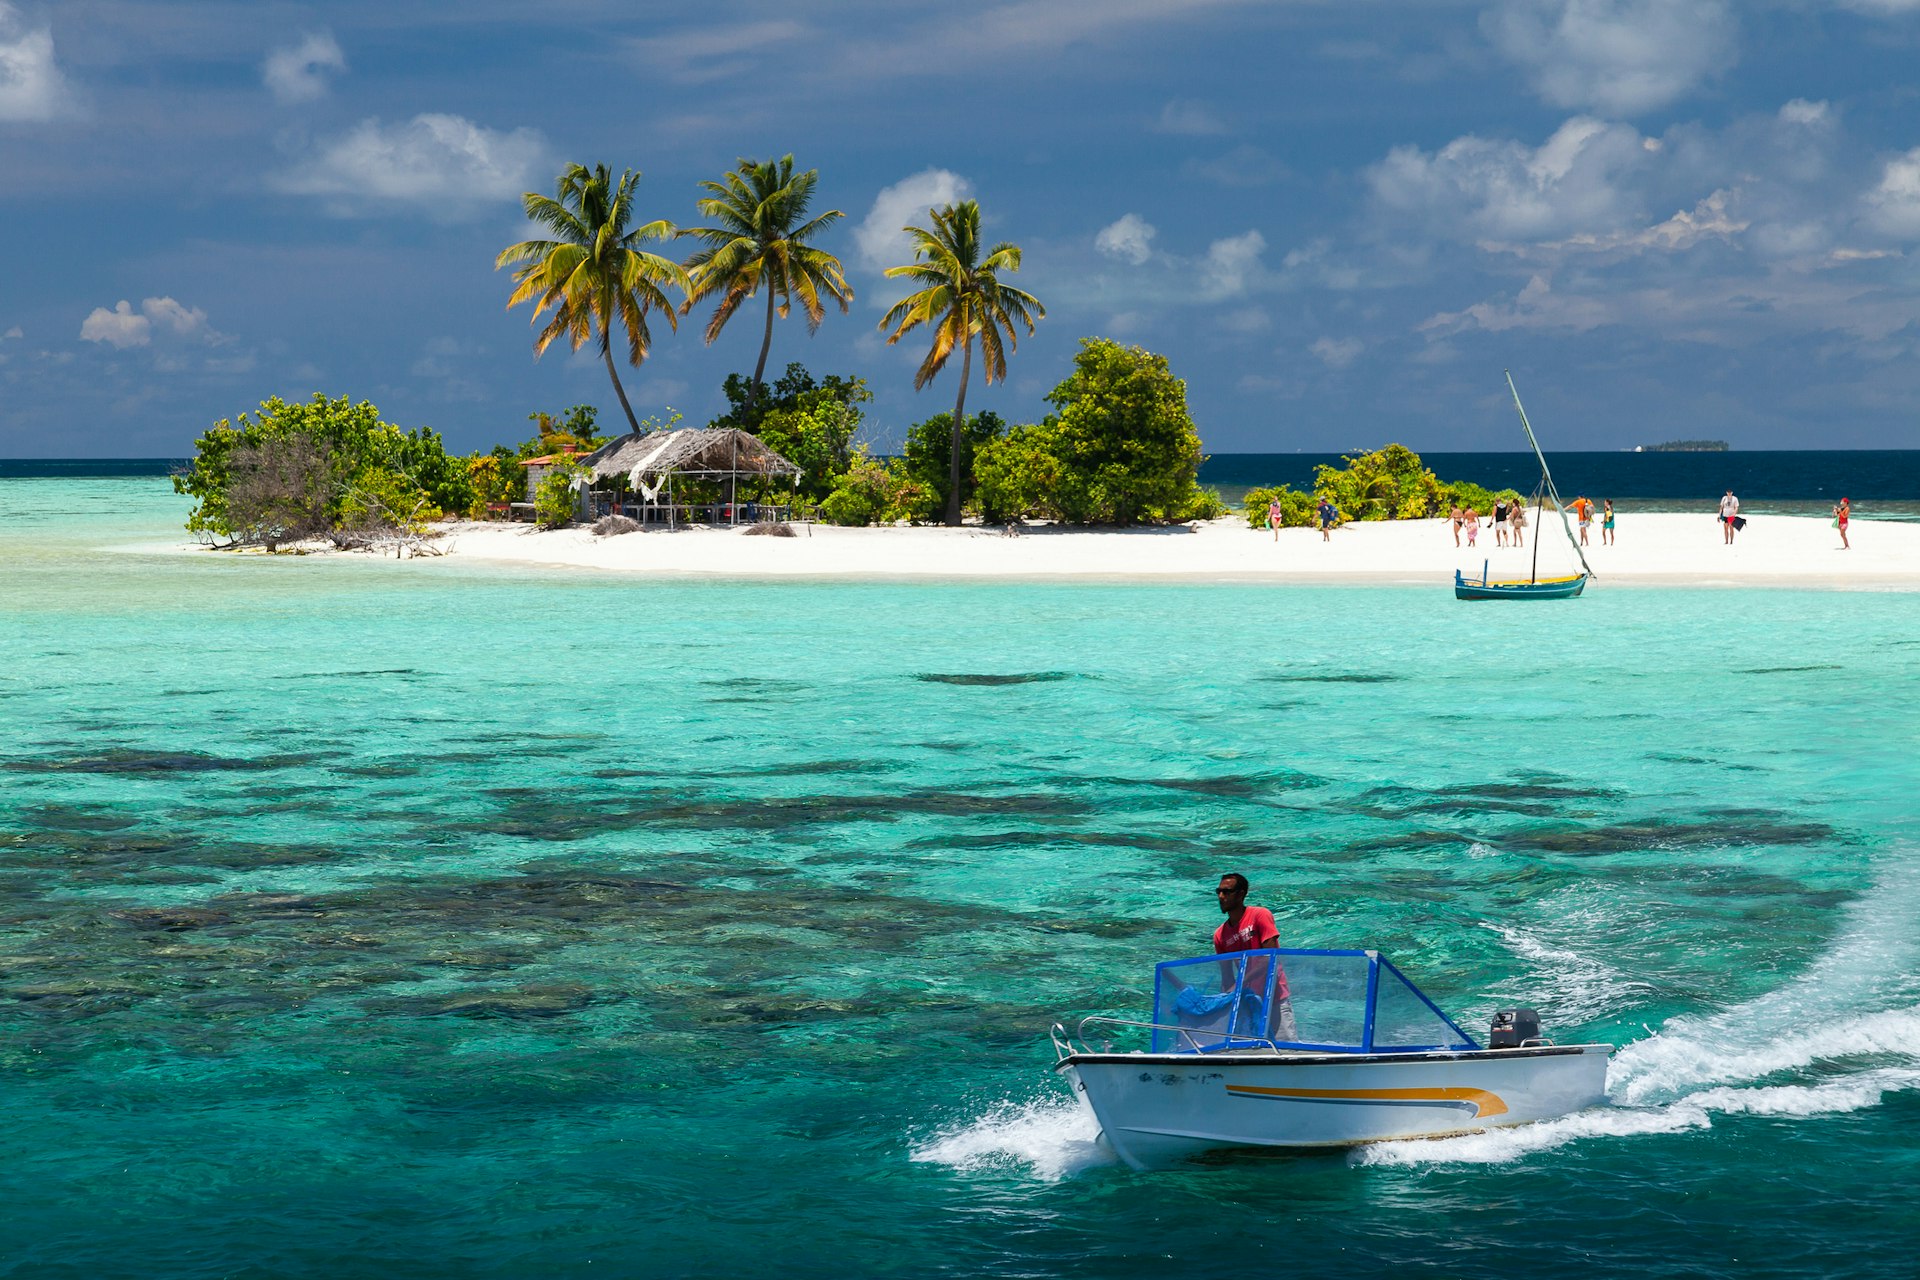 A small speedboat departs from a tiny island where people are gathered